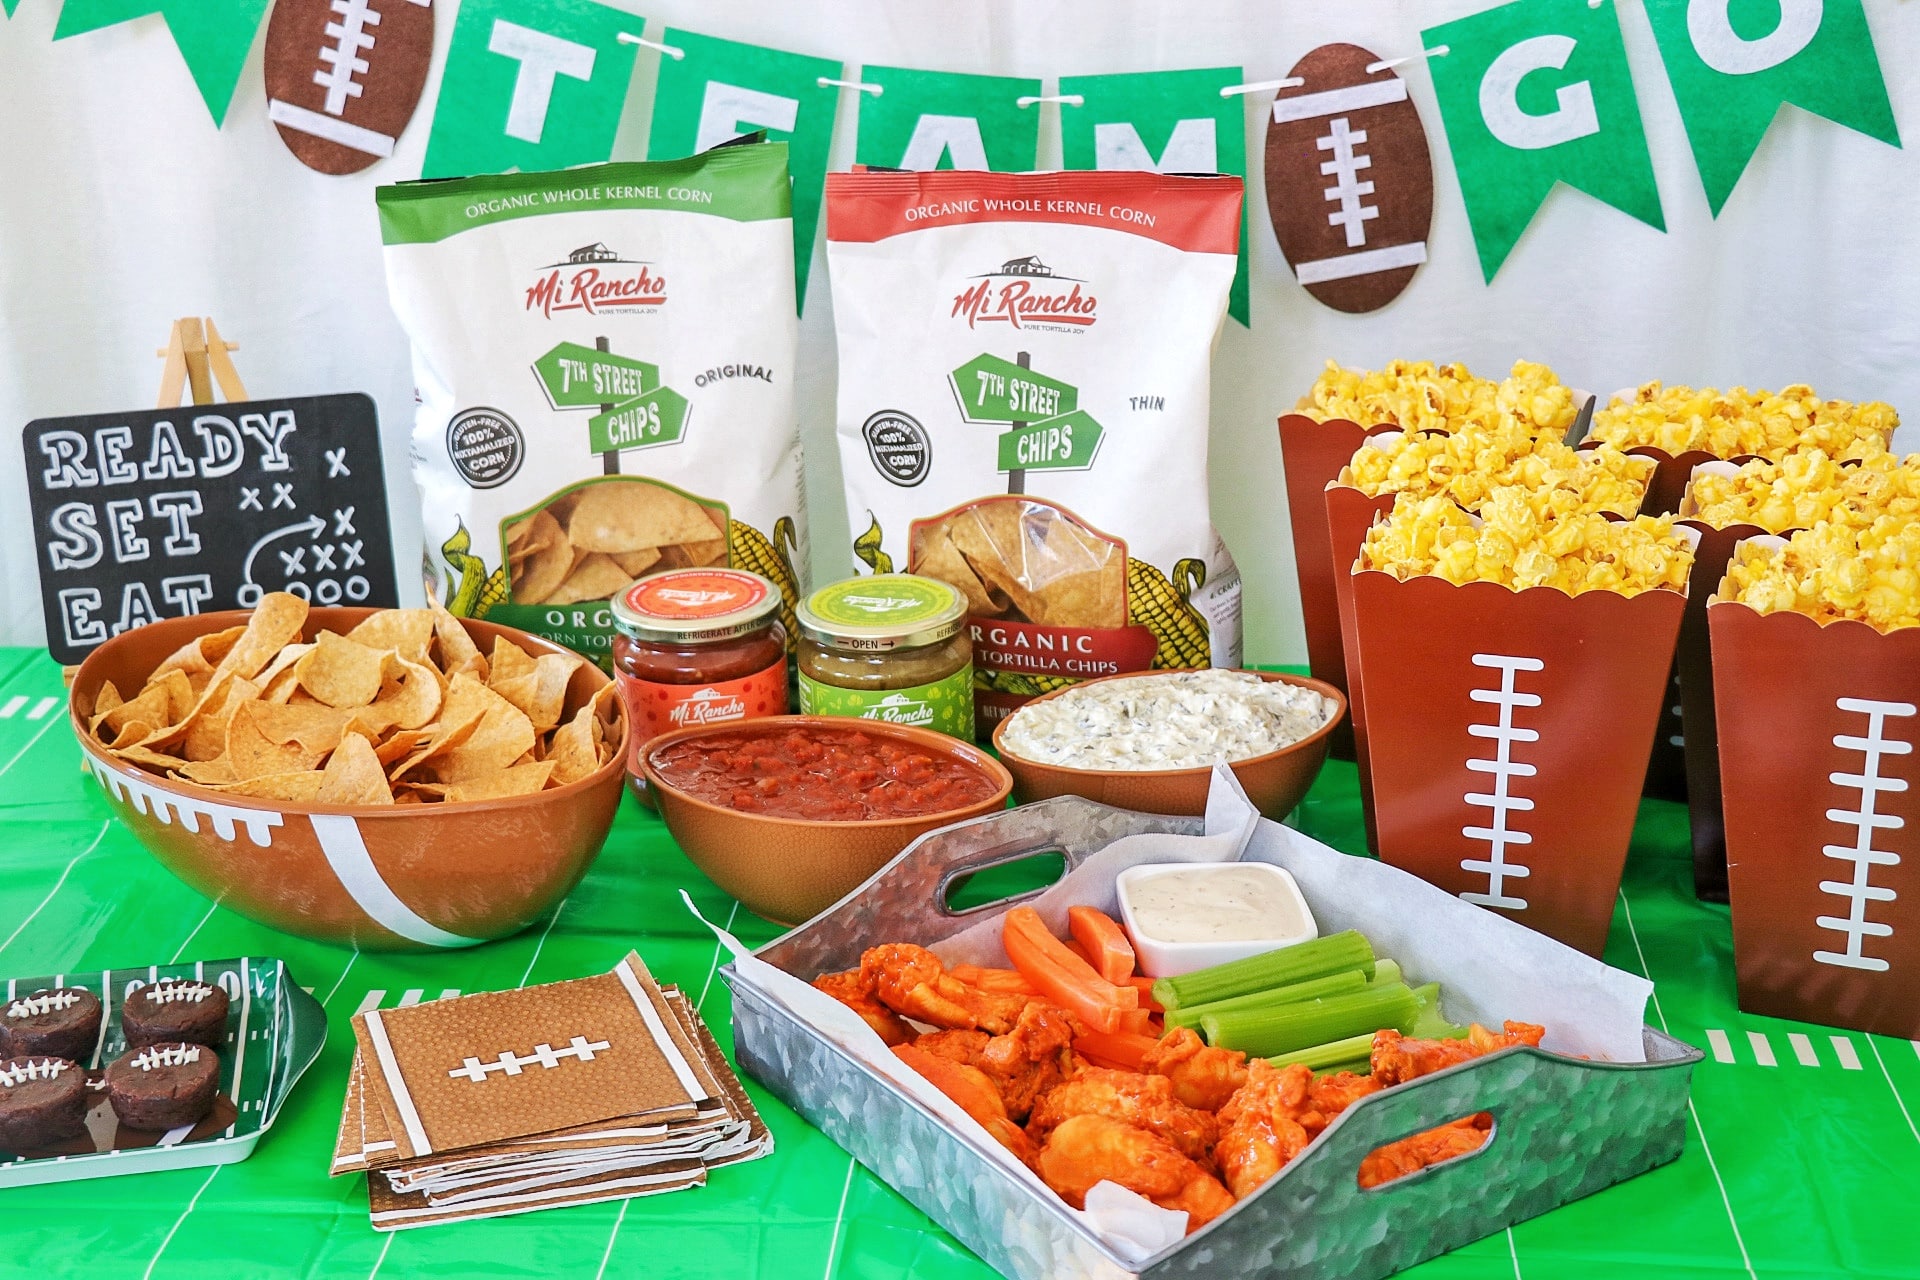 Must-haves for a Big Game party spread